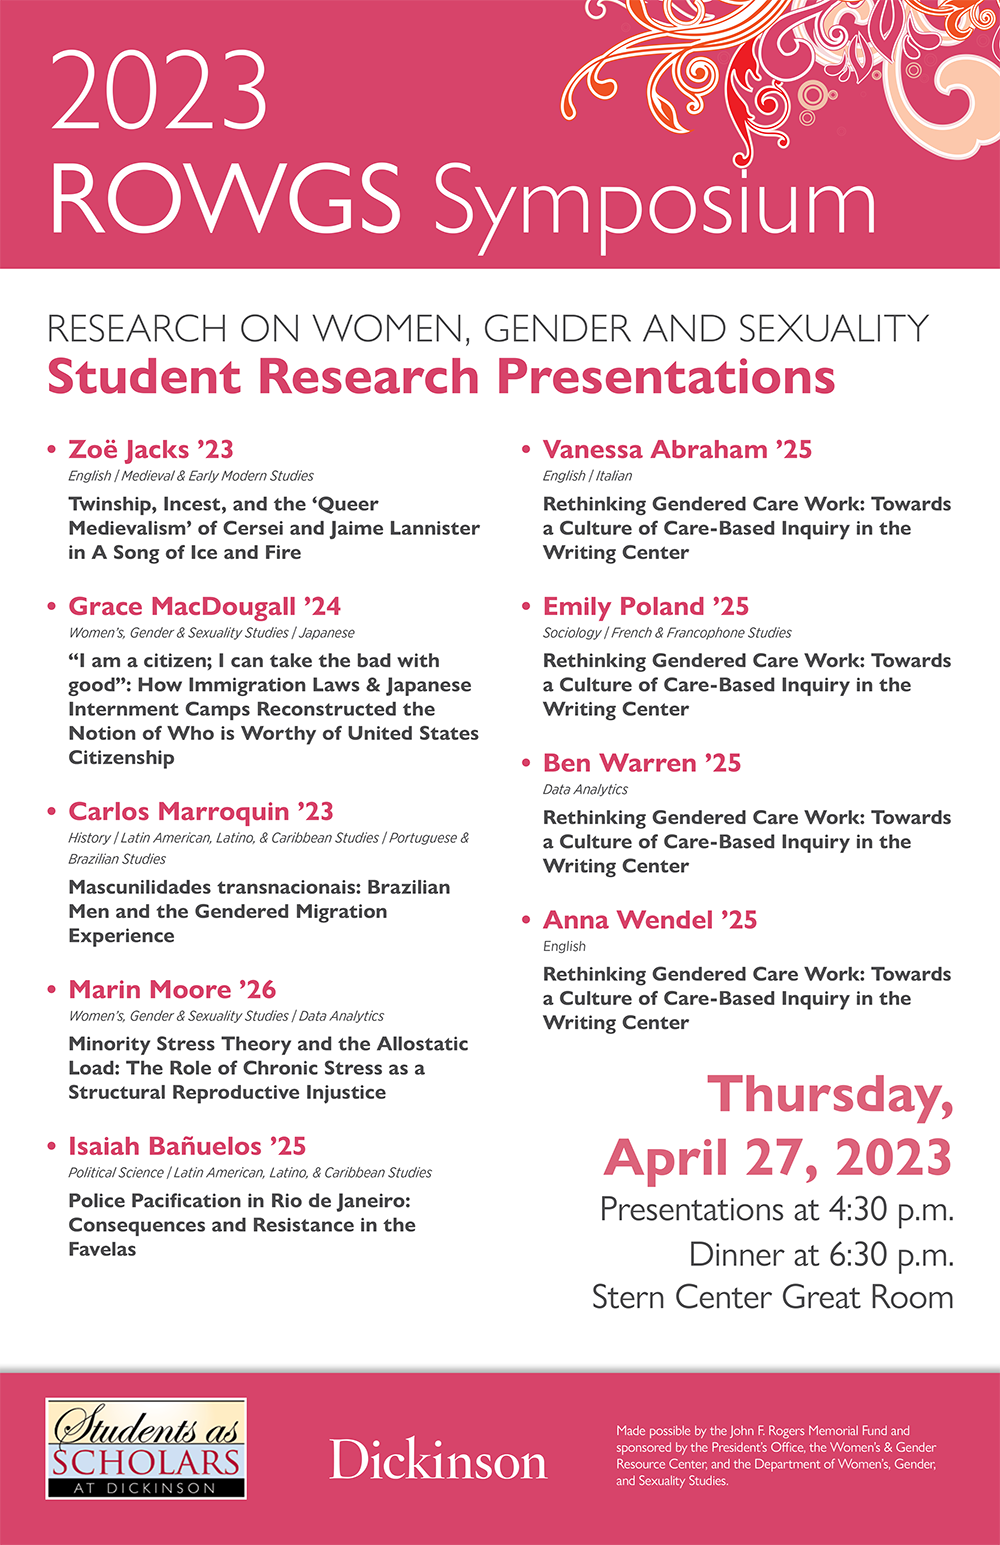 research on women, gender, and sexuality student research presentations 2023 poster 